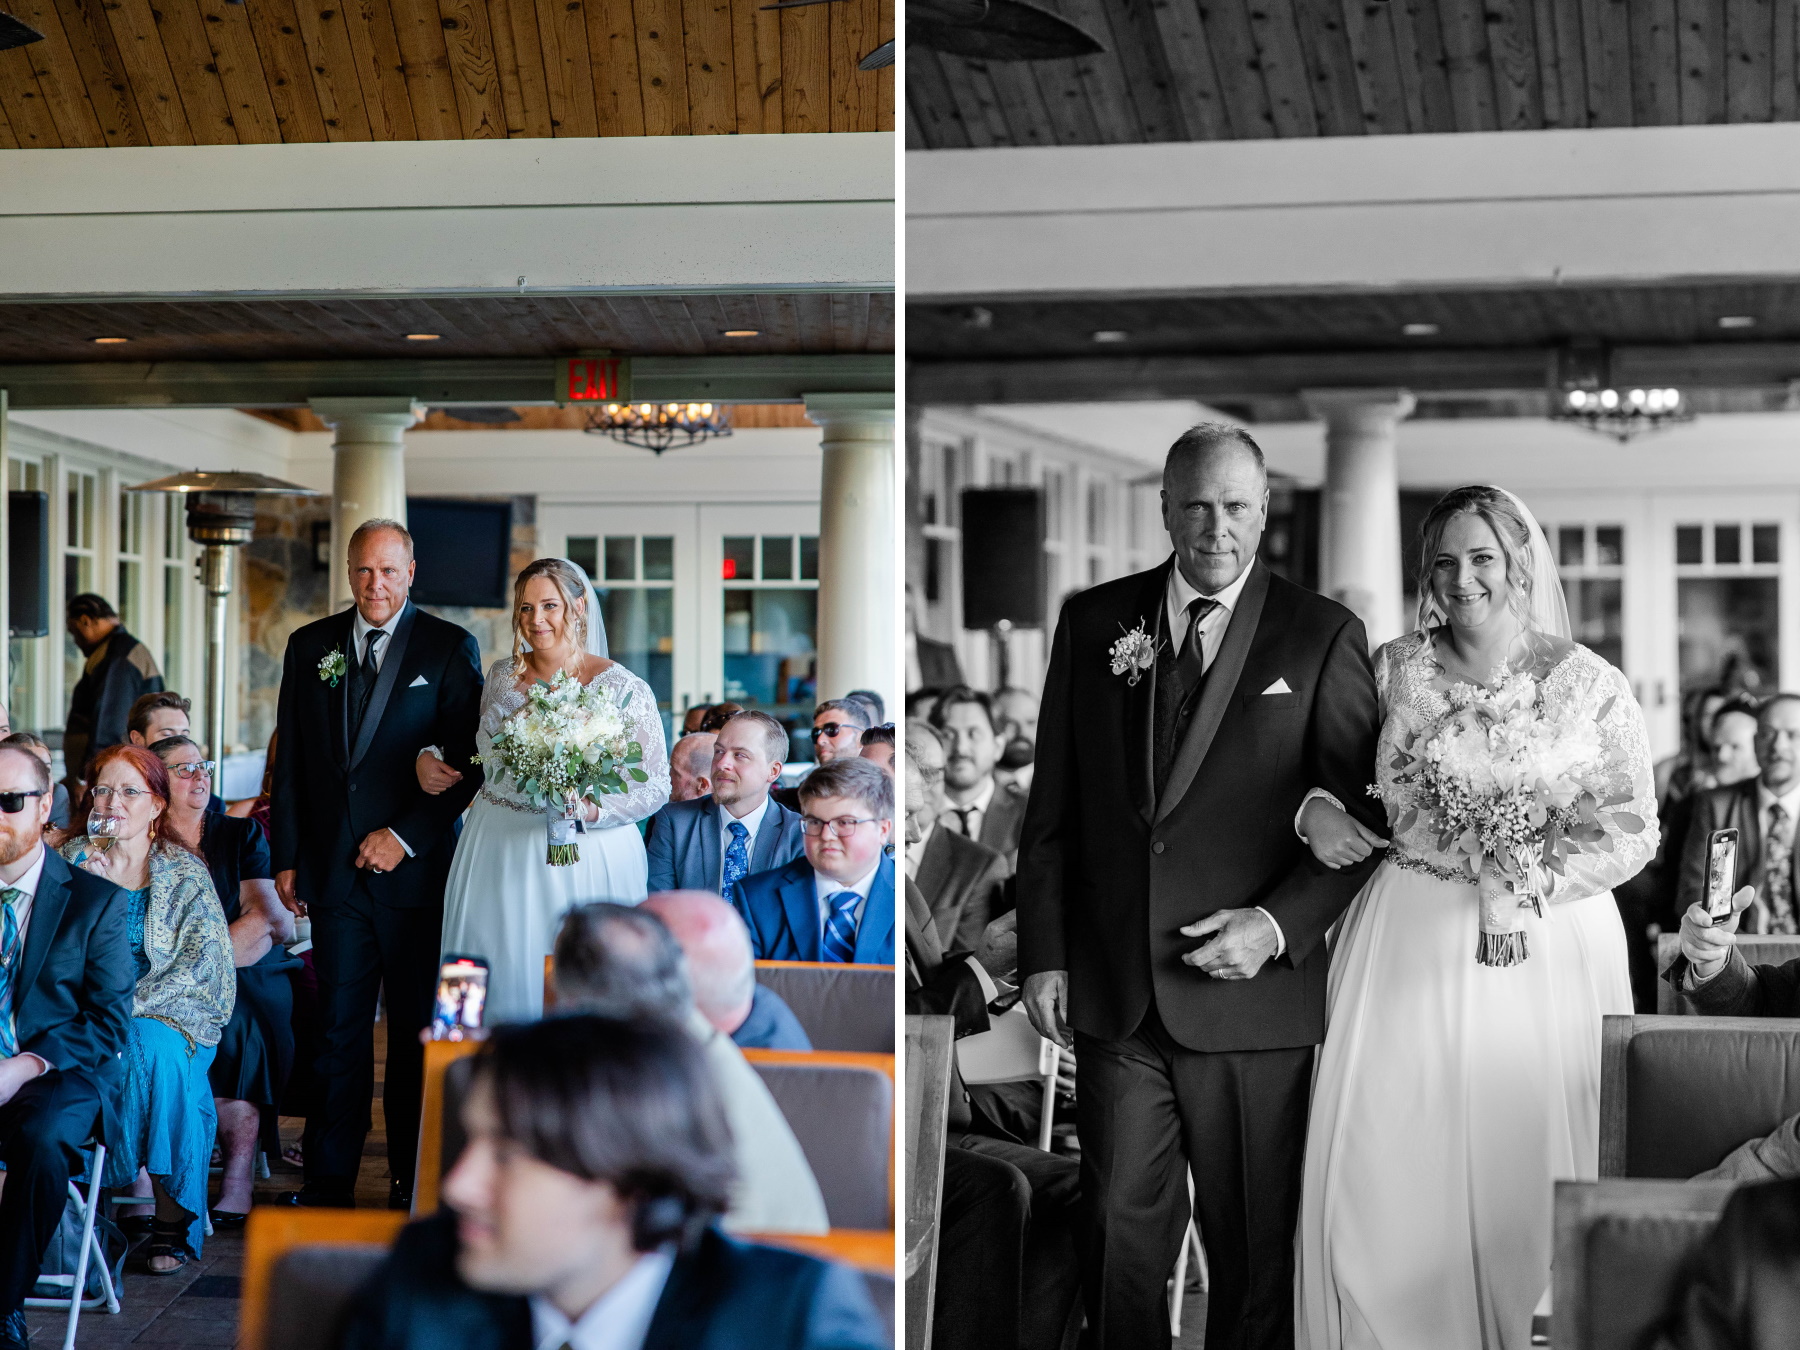 Bride and her father walk down the aisle during the ceremony at Great Neck Country Club Wedding